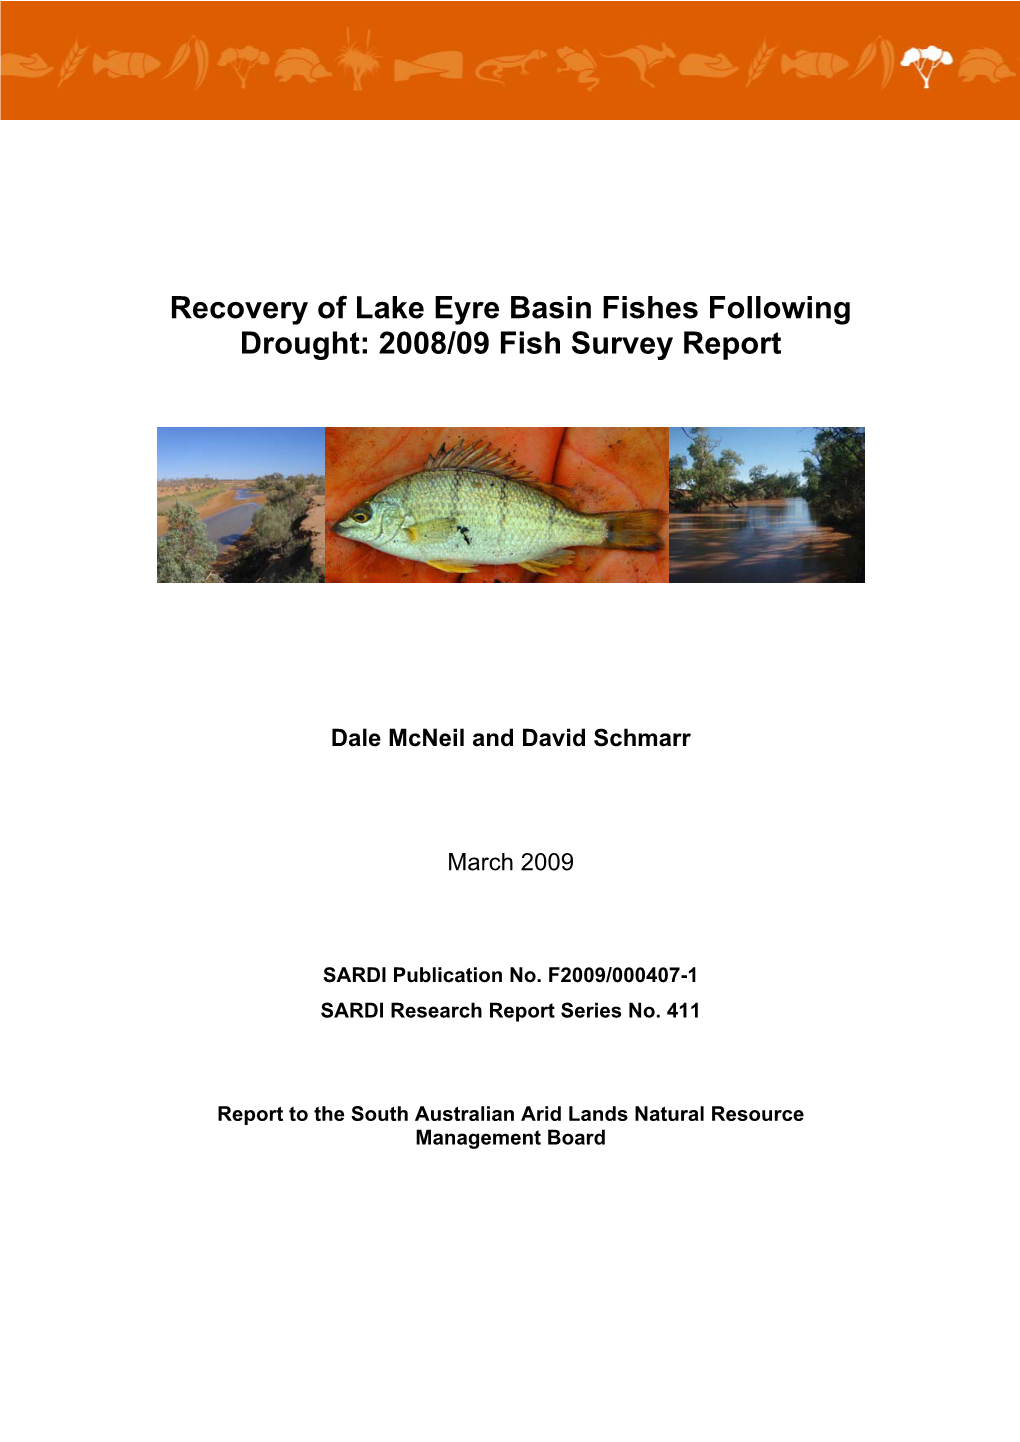 Recovery of Lake Eyre Basin Fishes Following Drought: 2008/09 Fish Survey Report